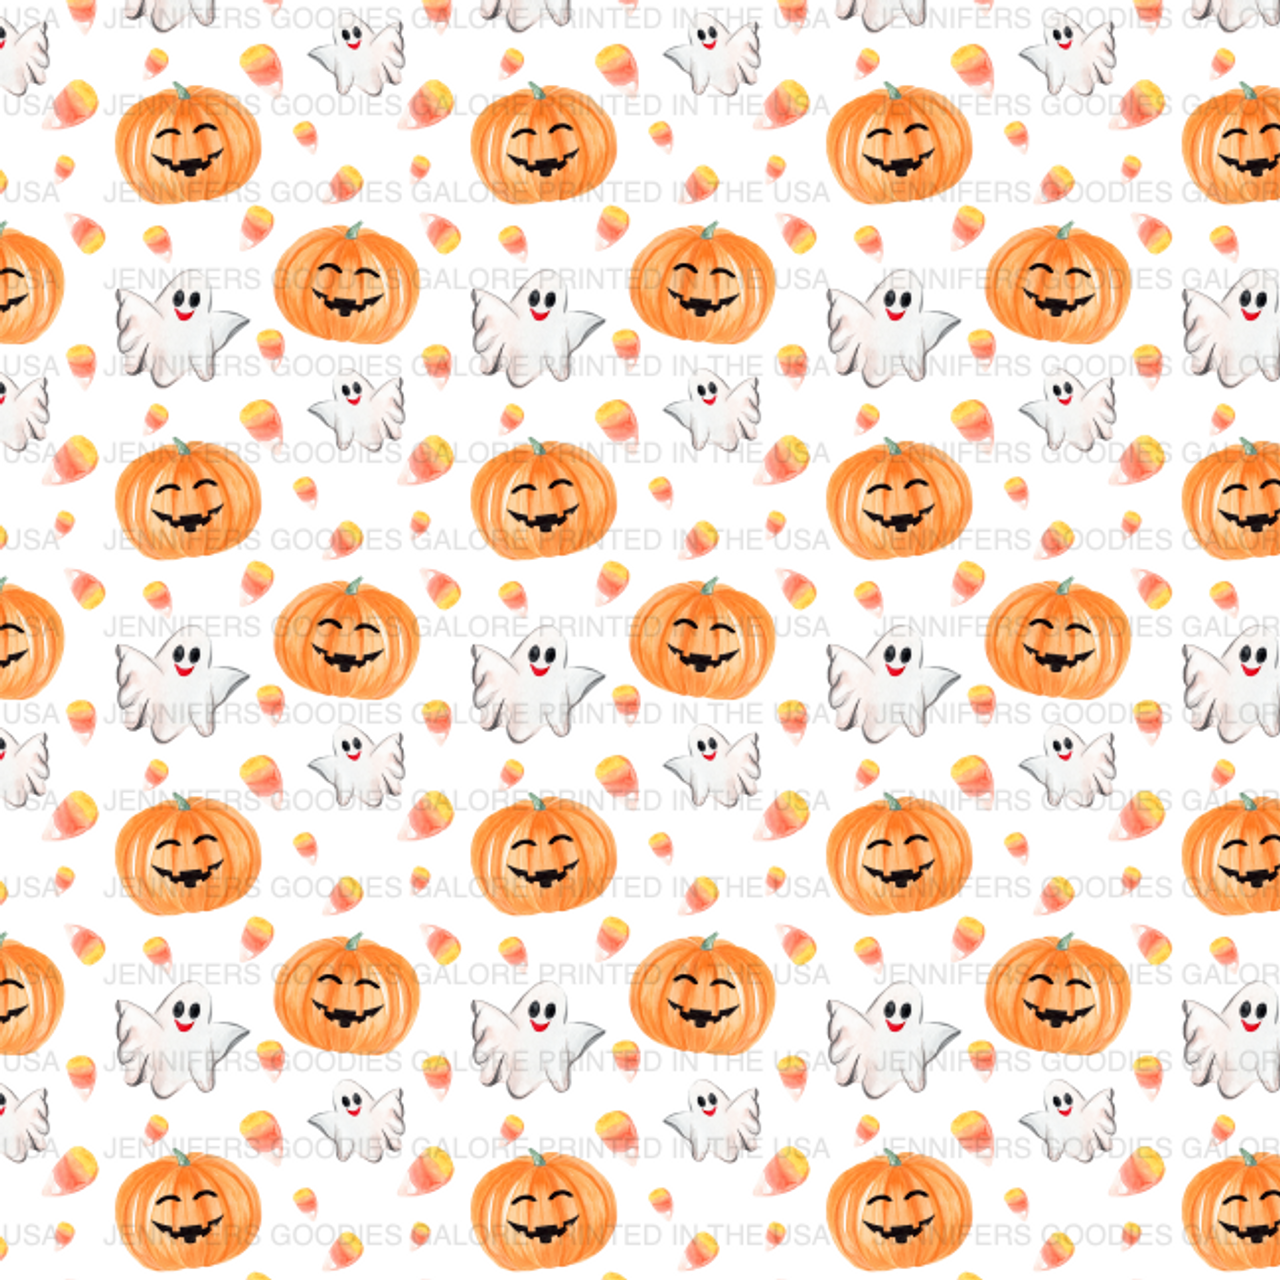 Download 8x11 Pumpkin Leather Fabric Custom Printed Leather Sheets Halloween Leather Sheets Ghost Leather Candy Corn Leather Fabric Synthetic Leather Faux Leather Vinyl Patent Glitter Diy Leather Bows Leather Crafts 1 Sheet